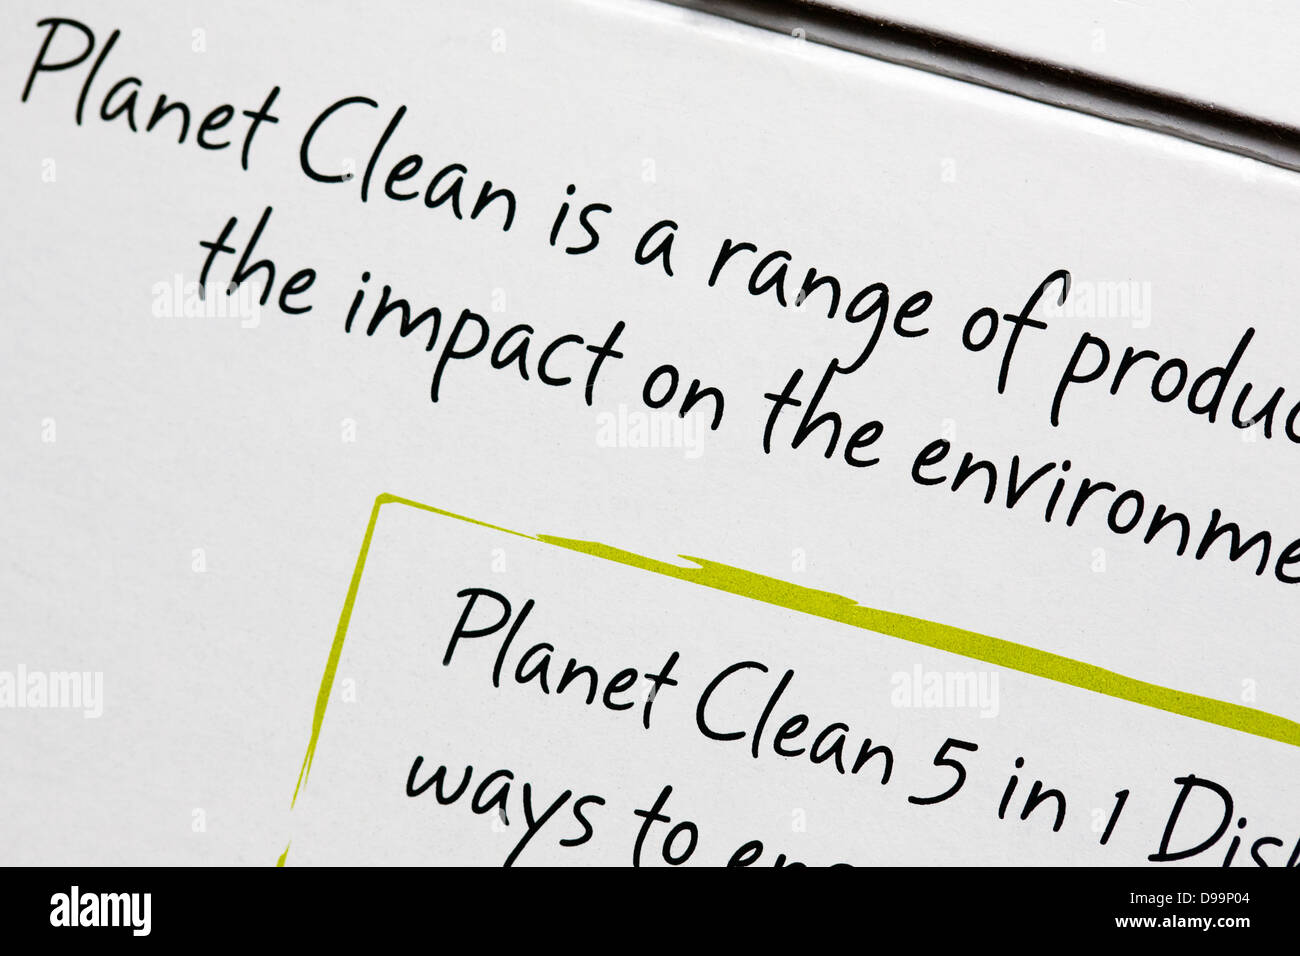 Planet Clean packaging information. Stock Photo